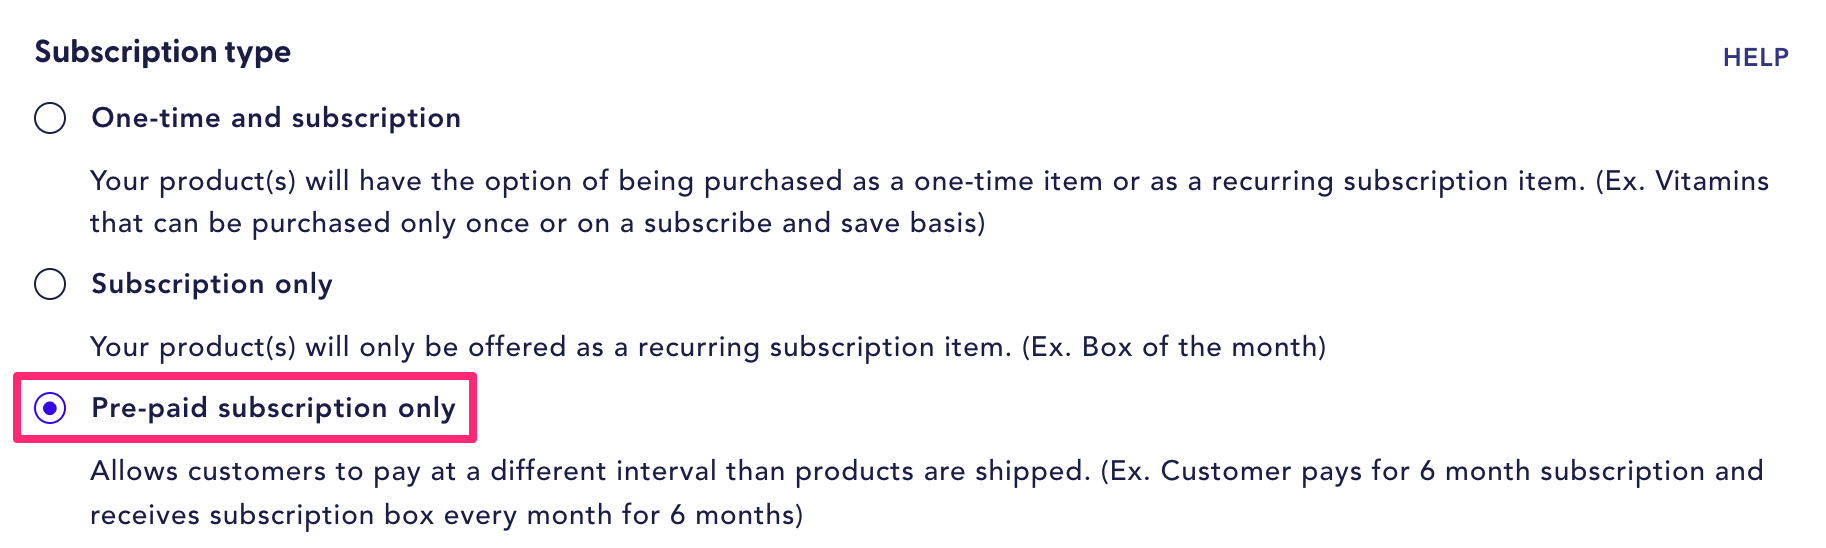 Create a pre-paid subscription product in Recharge